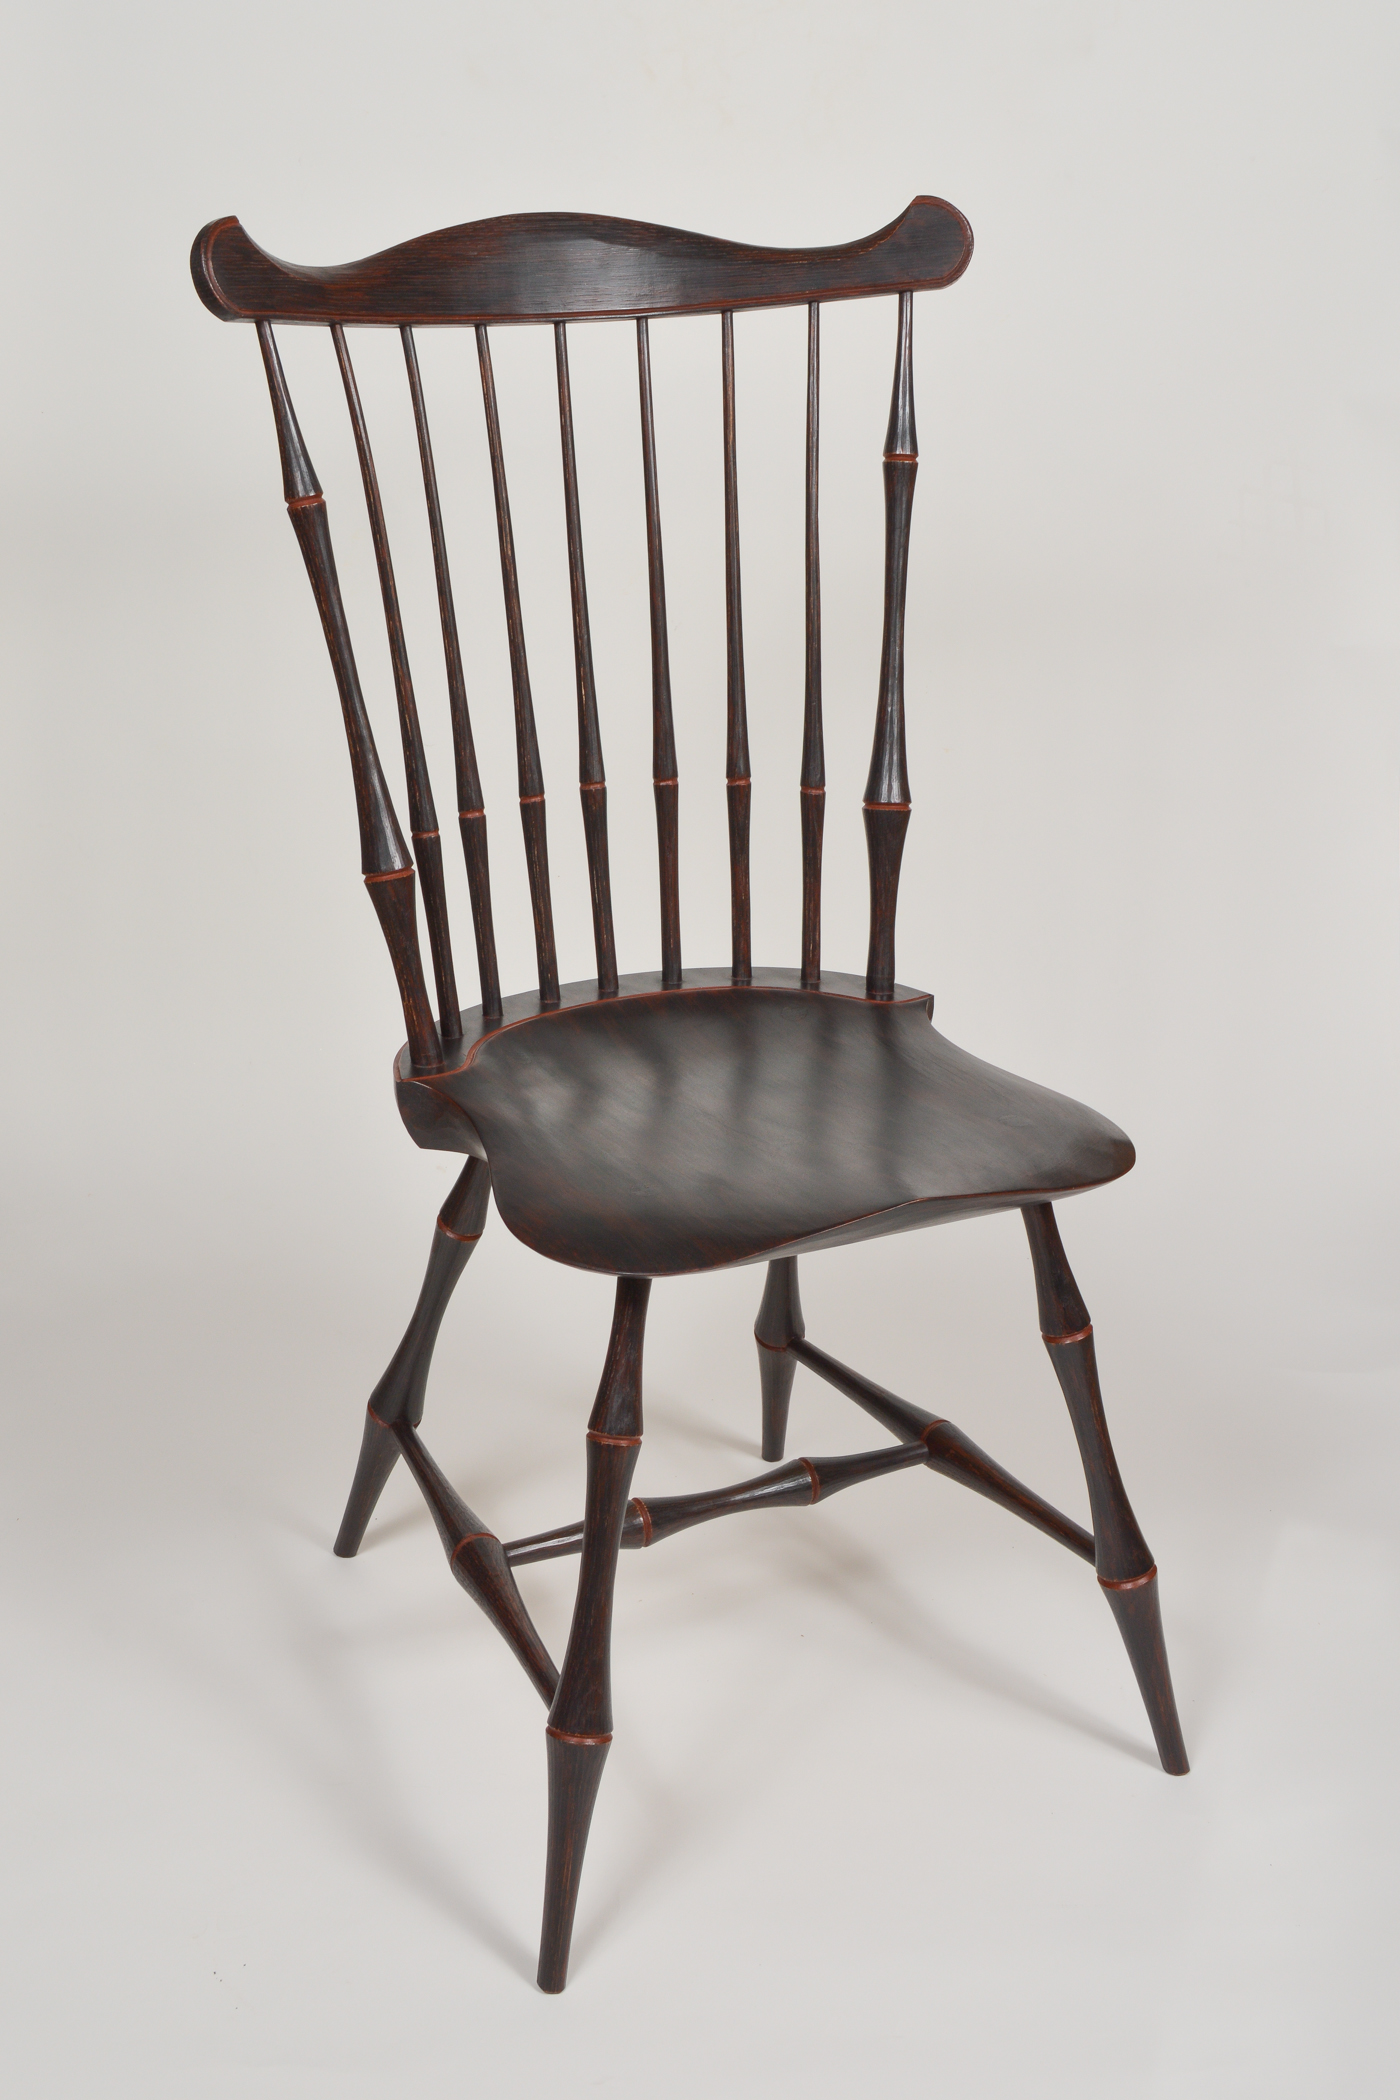 Bøde licens plade Full-Scale Drawings: How to Make a Fan Back Windsor Side Chair